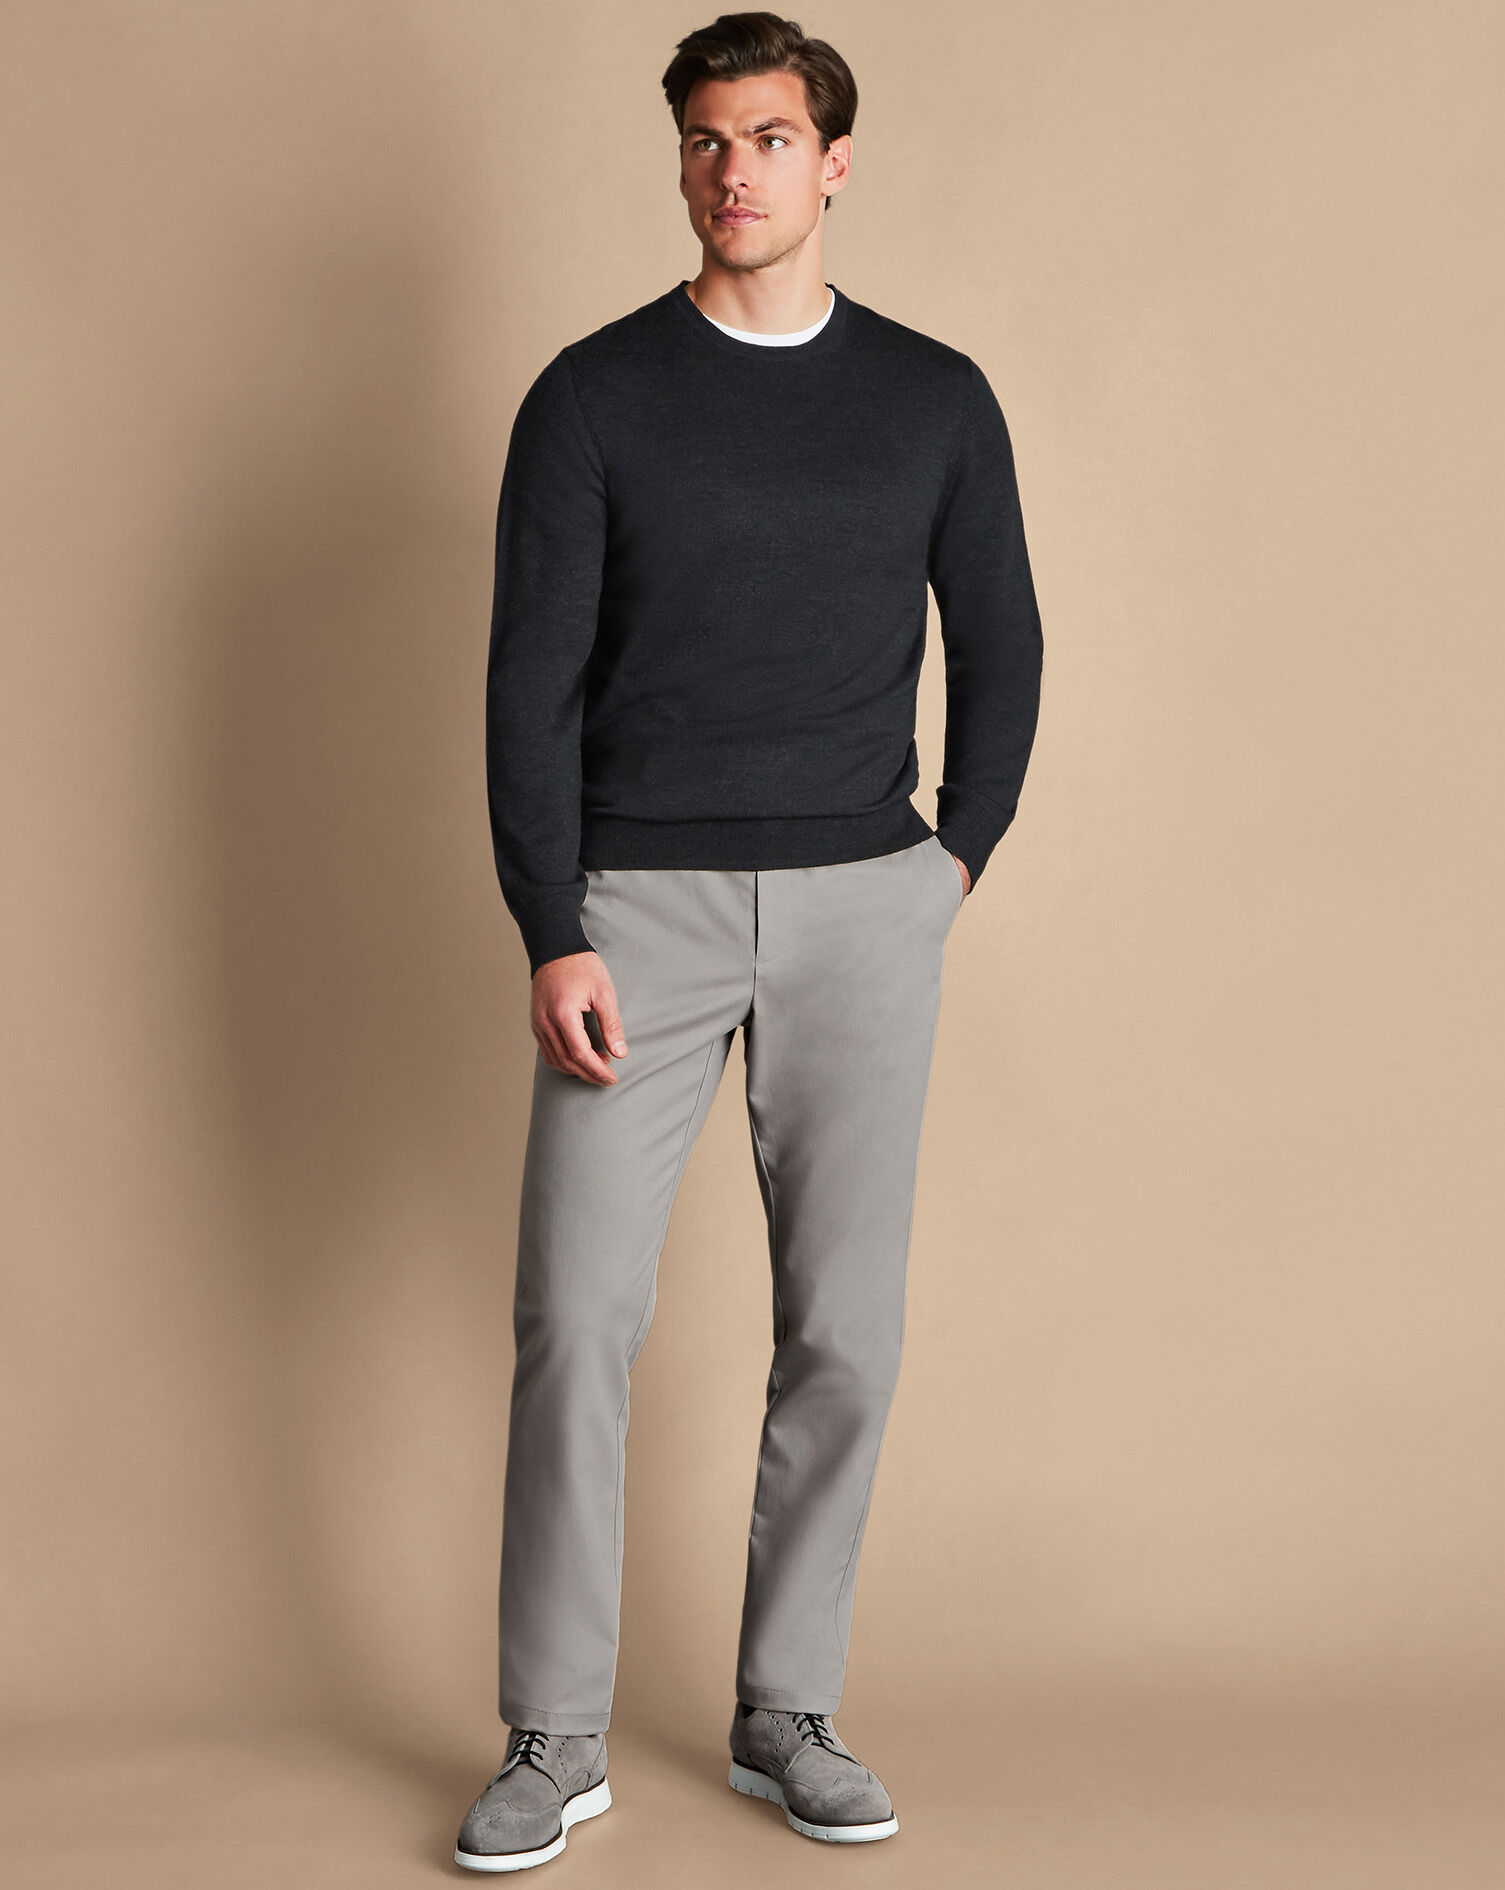 Buy Men Grey Slim Fit Check Flat Front Formal Trousers Online - 782390 |  Louis Philippe